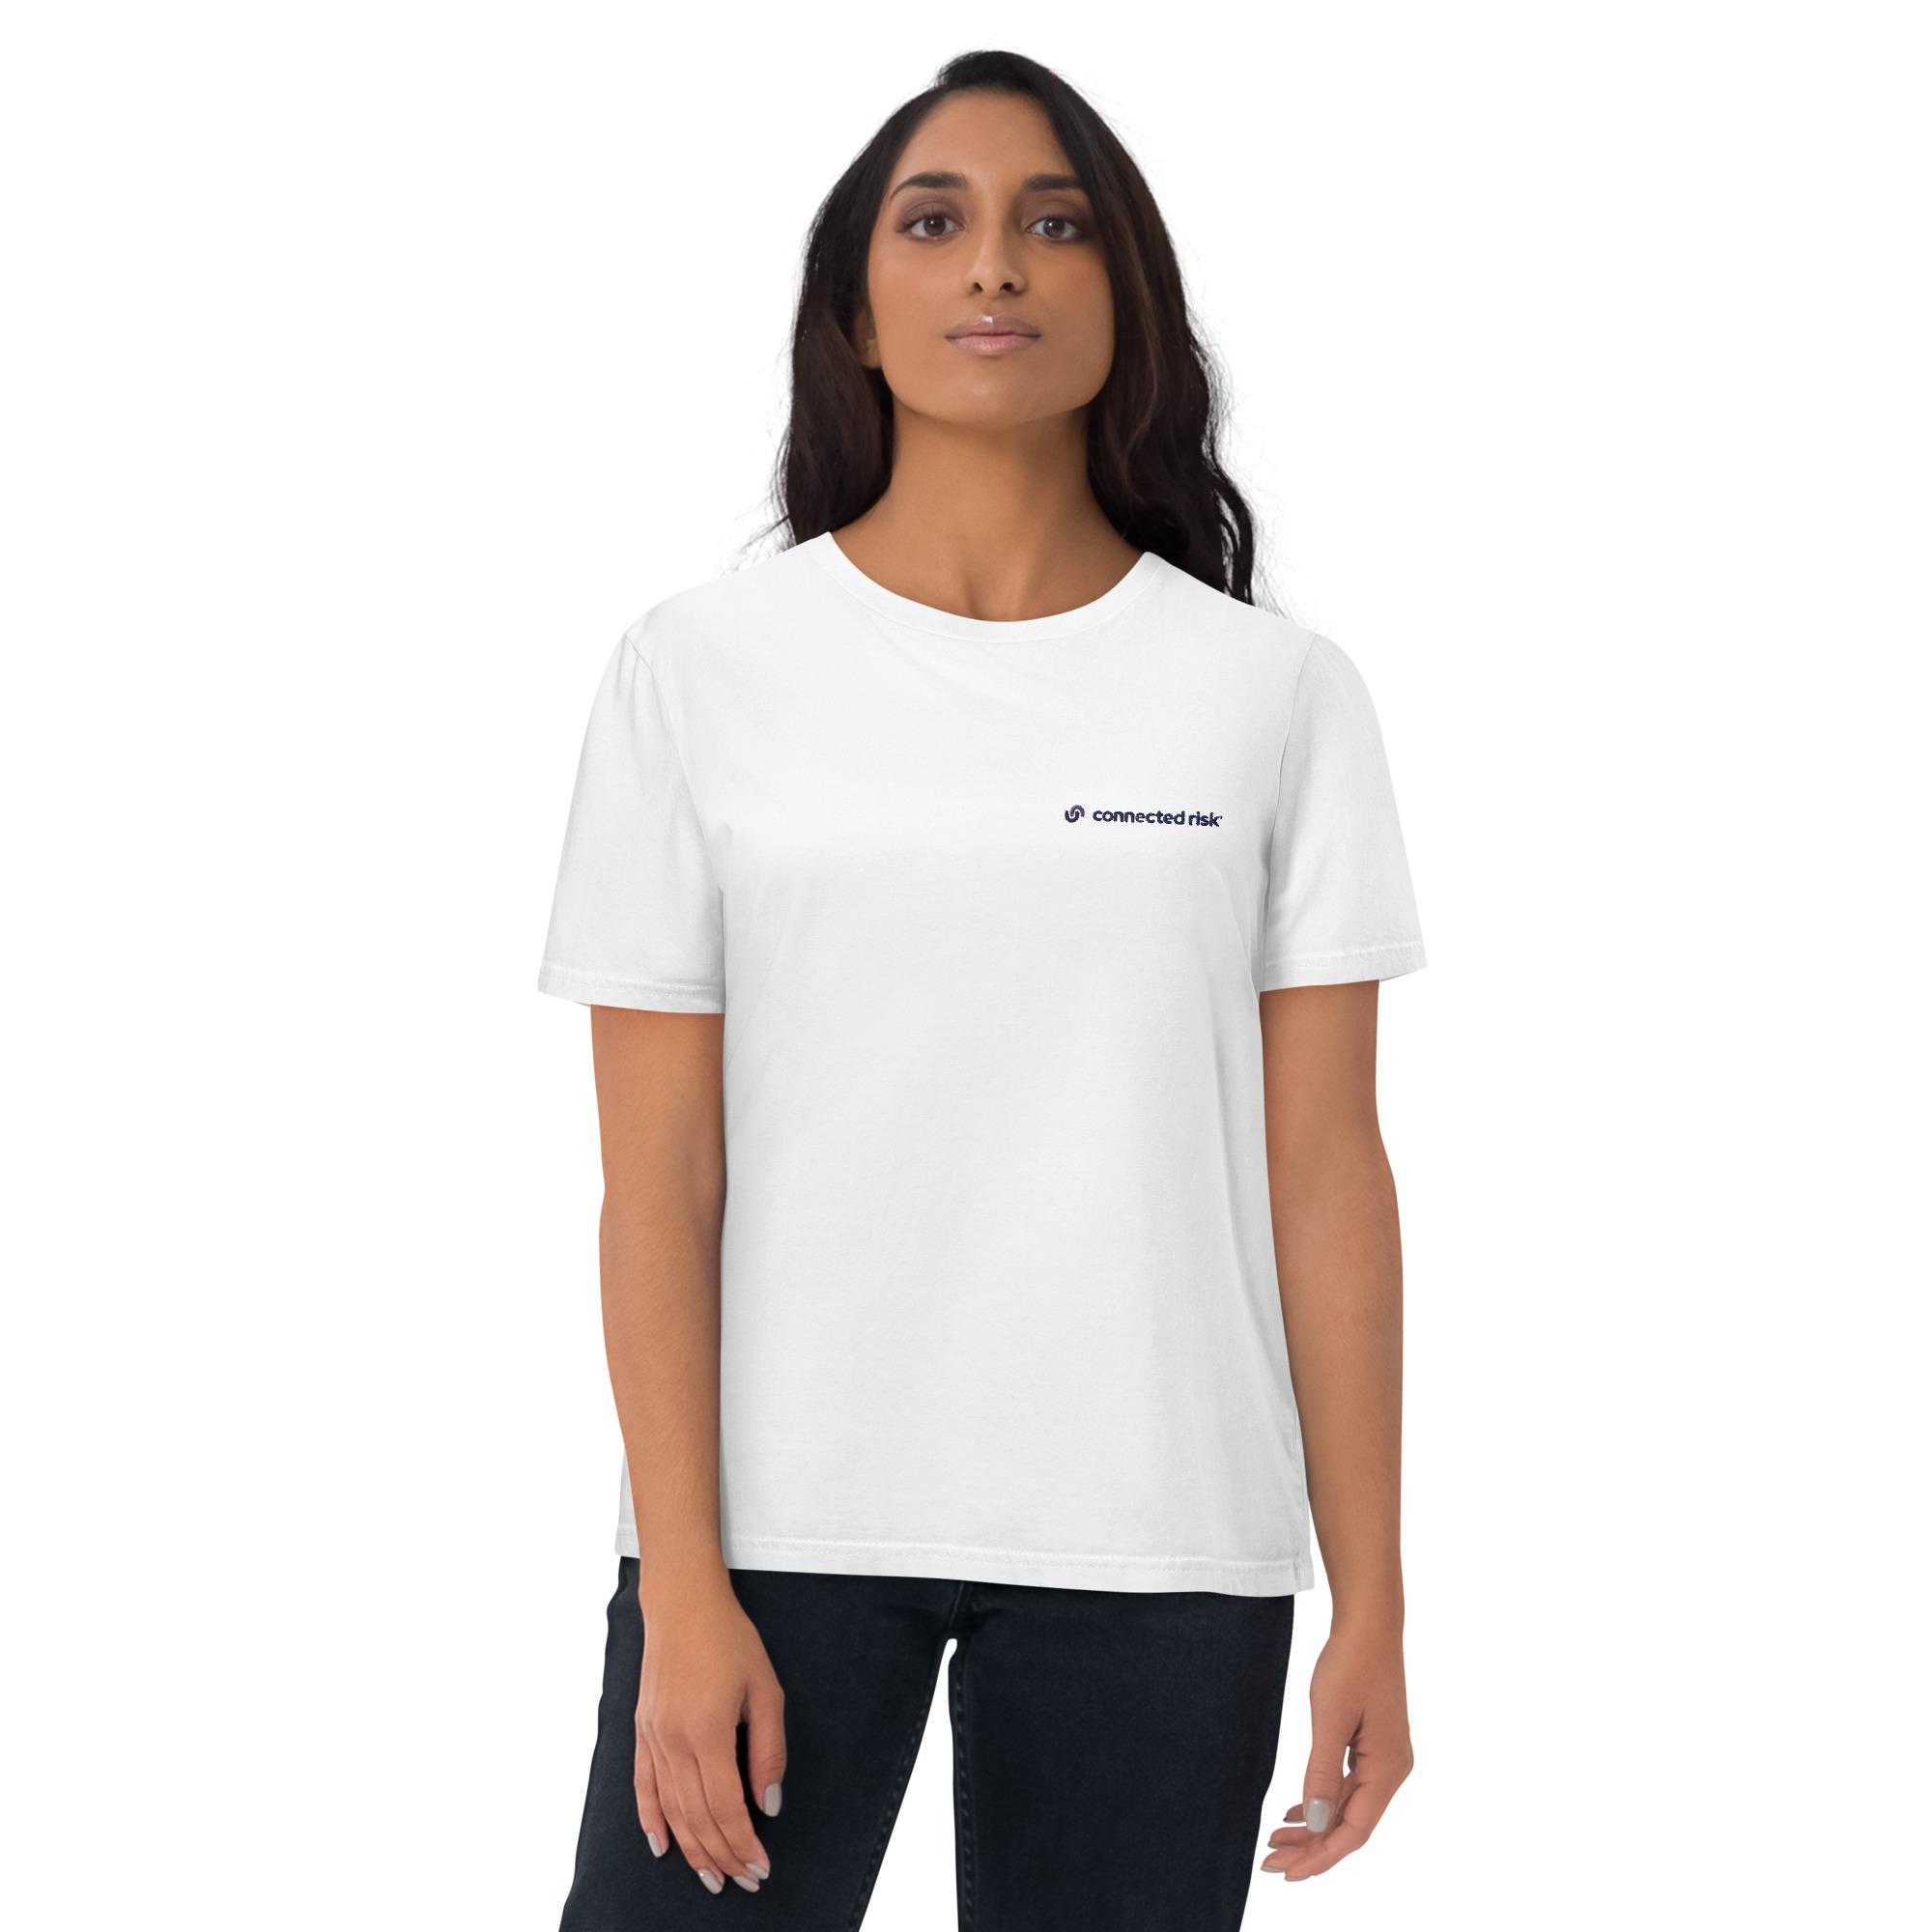 Product Connected Risk Unisex organic cotton t-shirt - Empowered Systems Brand Store image